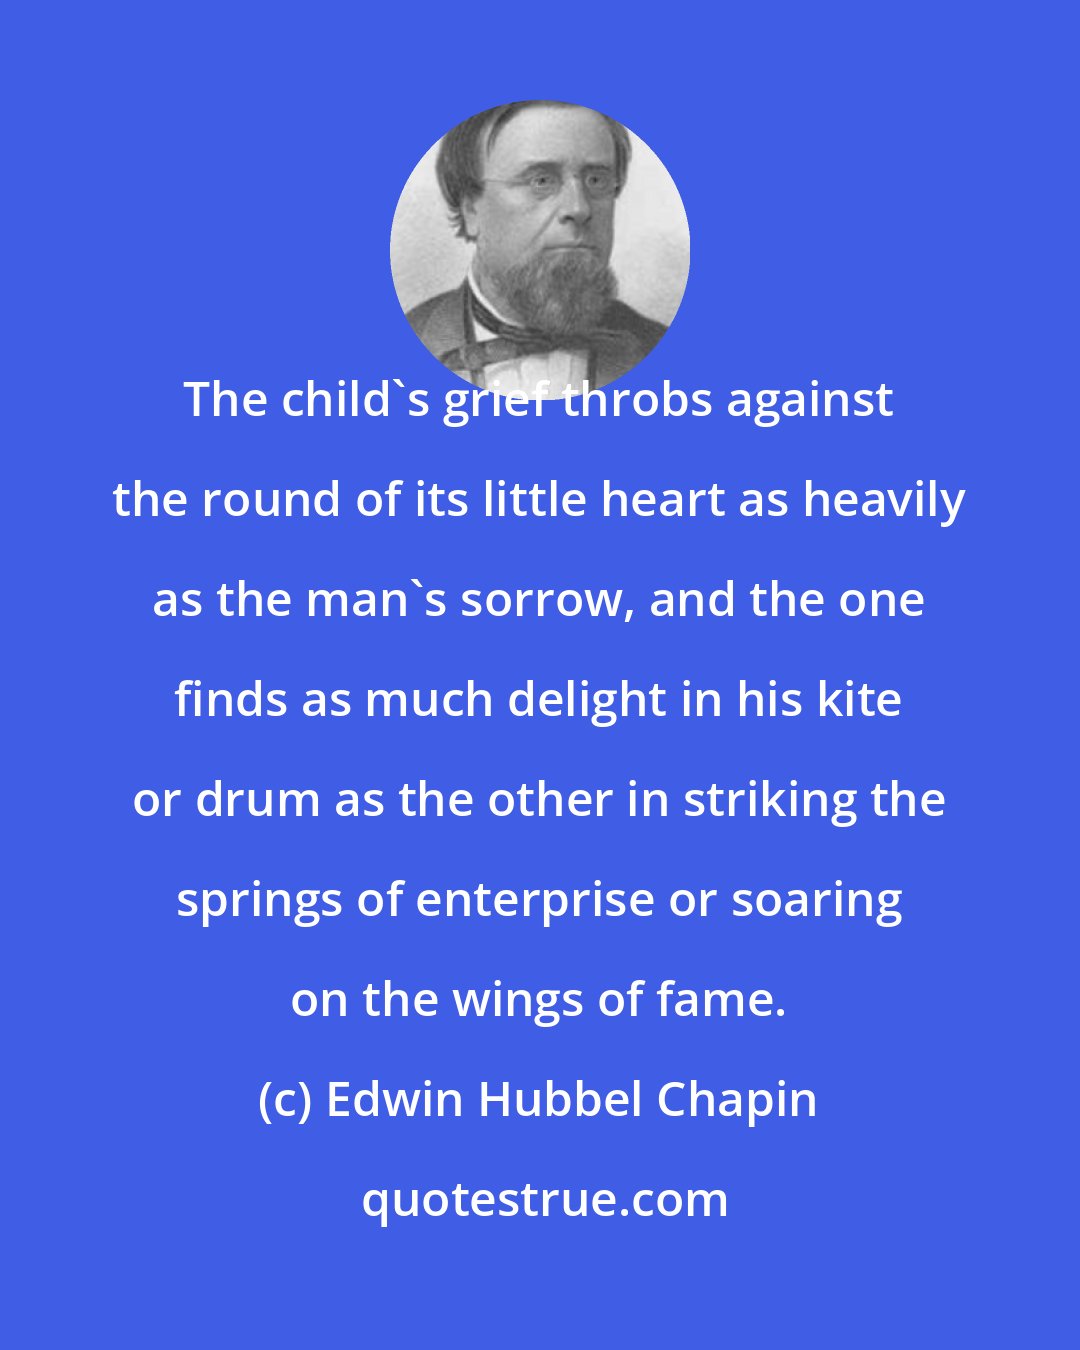 Edwin Hubbel Chapin: The child's grief throbs against the round of its little heart as heavily as the man's sorrow, and the one finds as much delight in his kite or drum as the other in striking the springs of enterprise or soaring on the wings of fame.